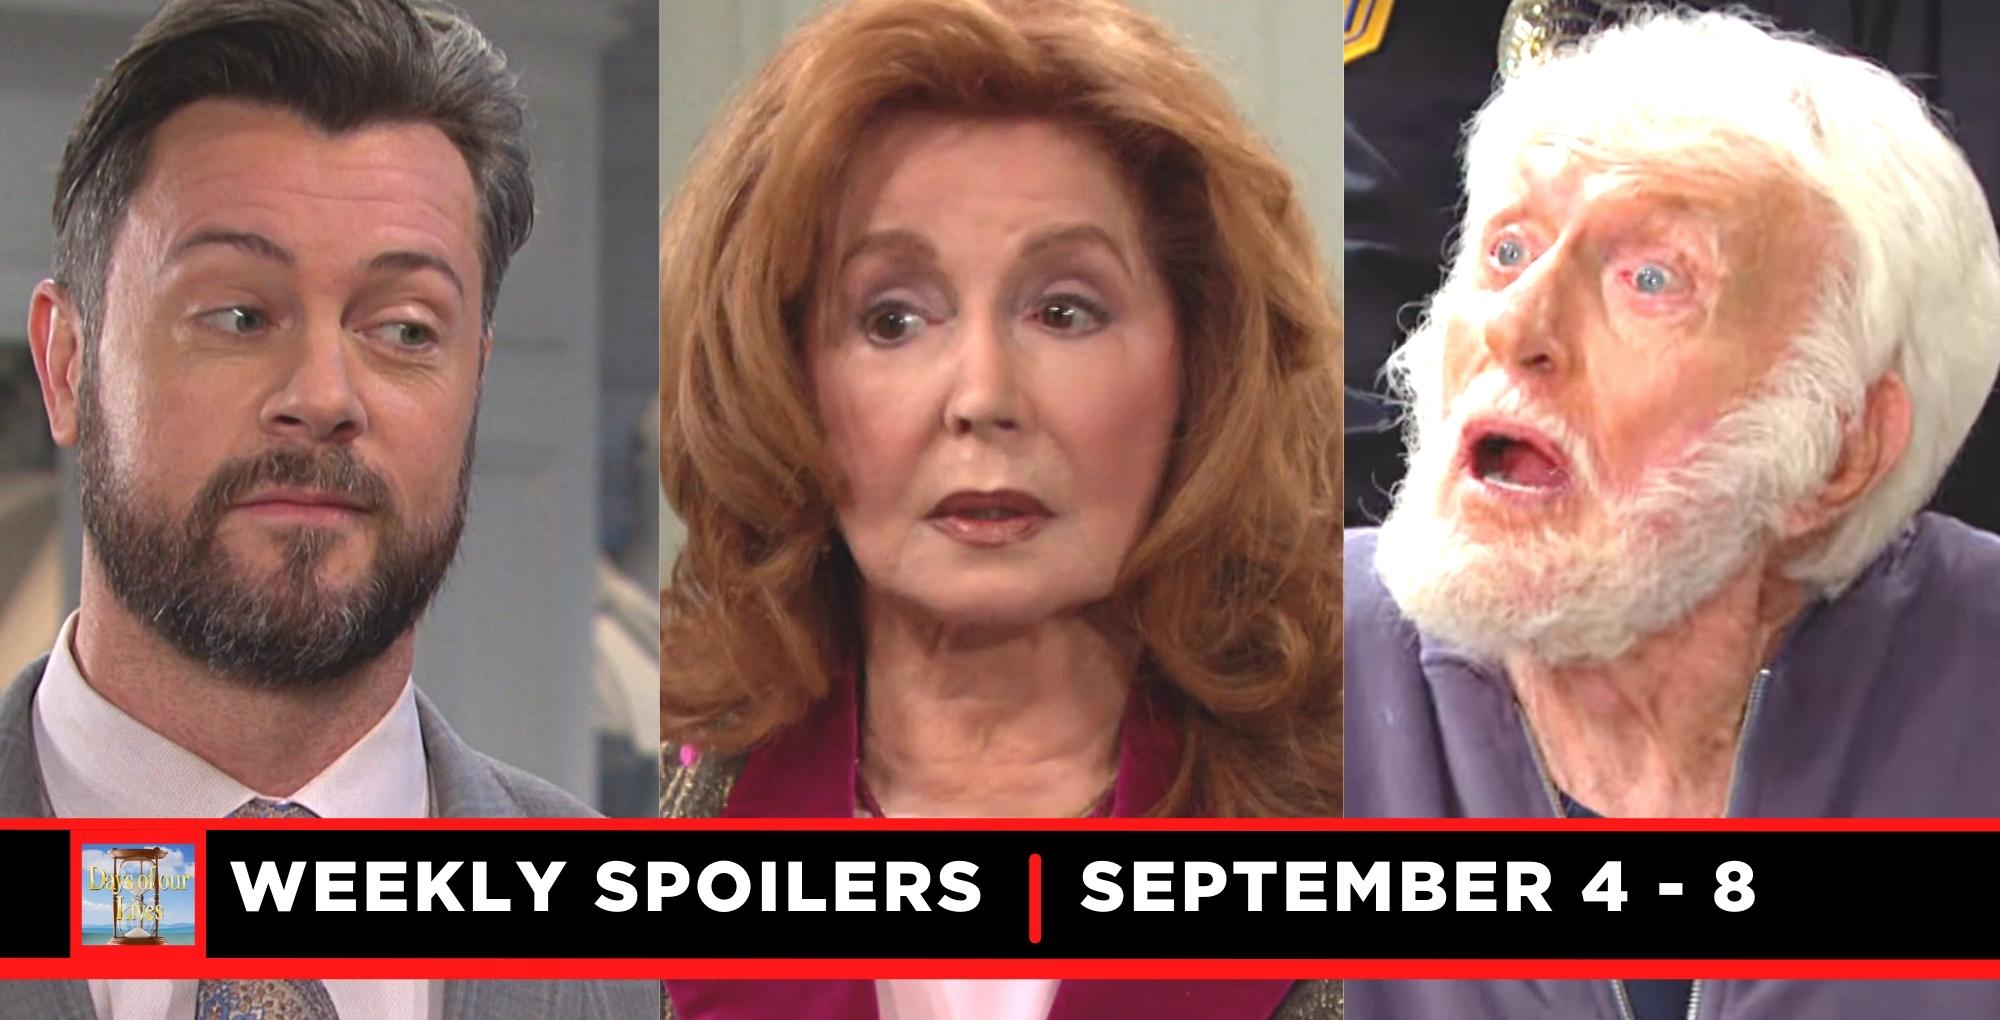 days of our lives spoilers for september 4 – september 8, 2023, three images, ej, maggie, and "mr bell".